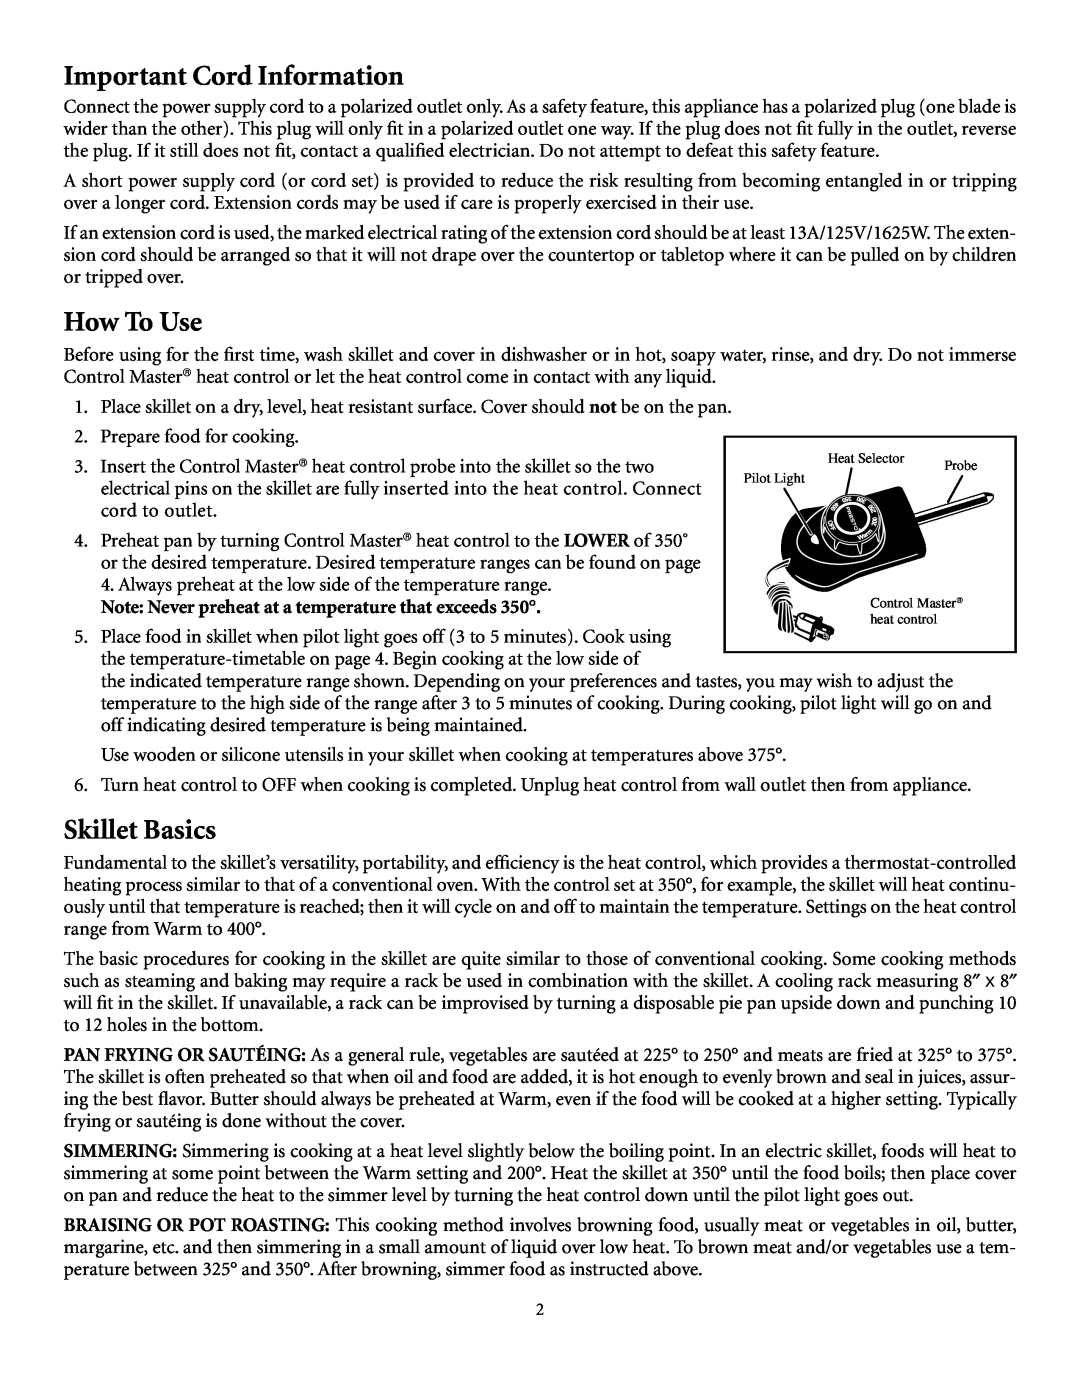 Presto electric Stainless Steel Skillet manual Important Cord Information, How To Use, Skillet Basics 